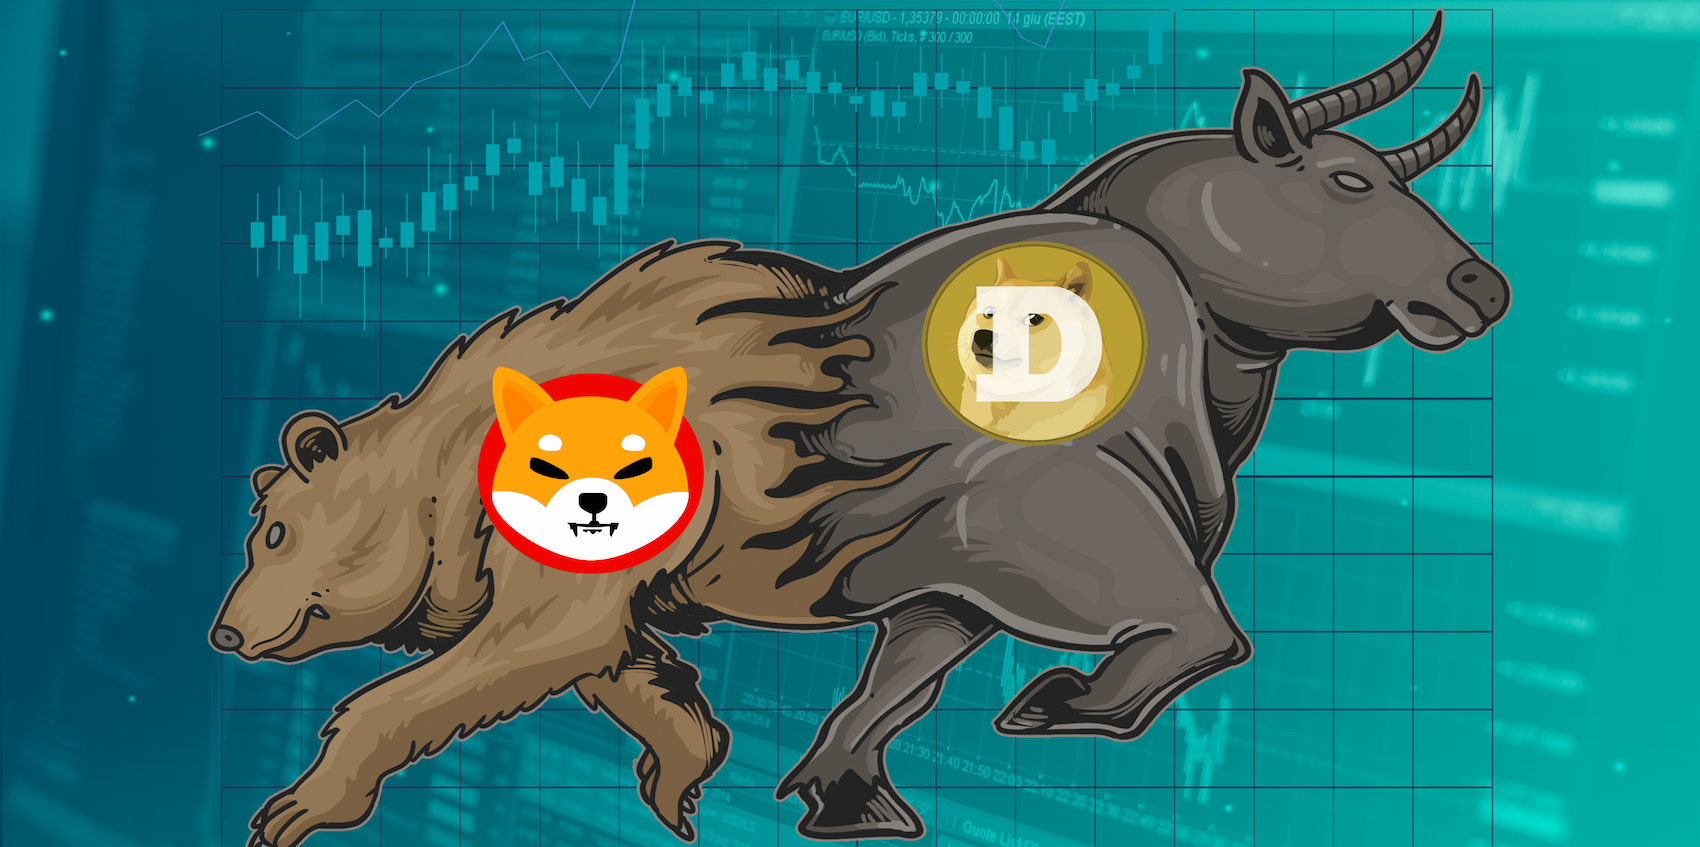 Meme tokens SHIB and DOGE have formed technical patterns of opposite nature